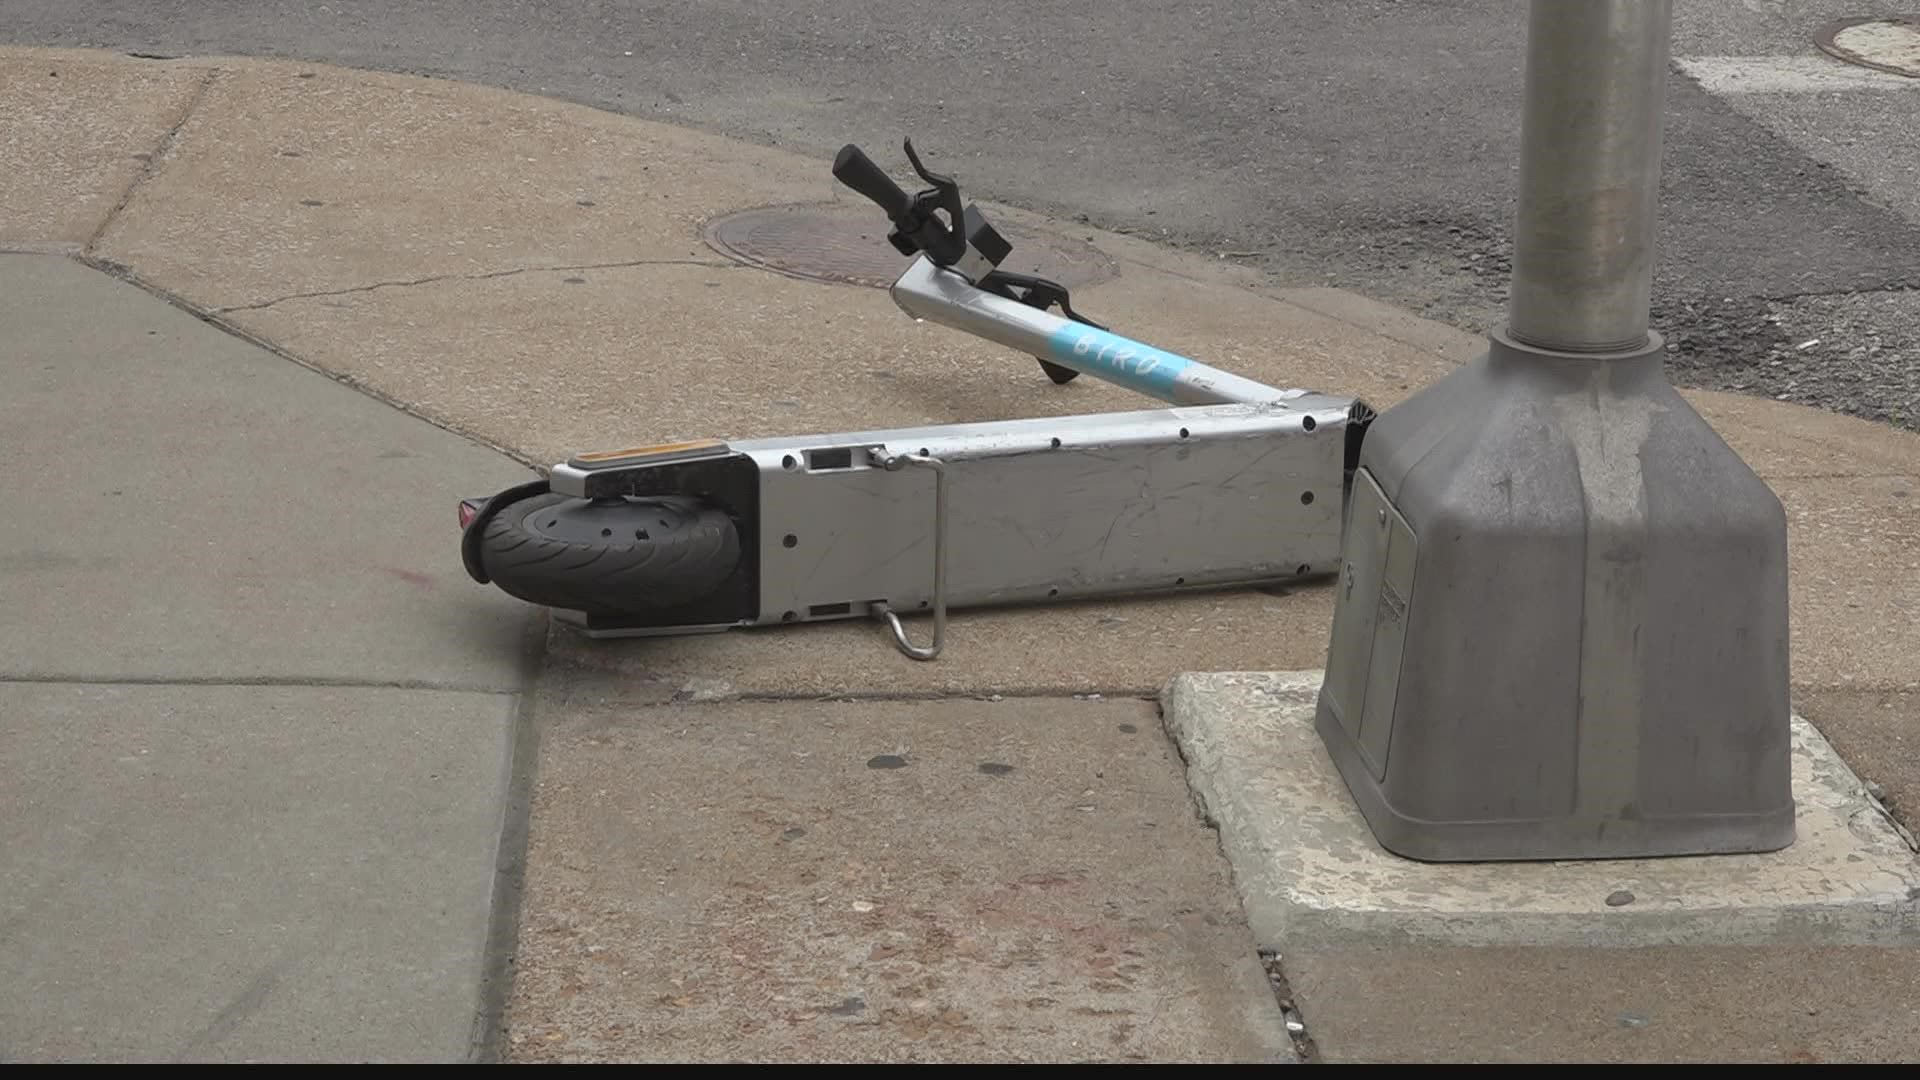 Leaders said the scooters would be banned in downtown St. Louis. But on Tuesday, they were still working in the city.